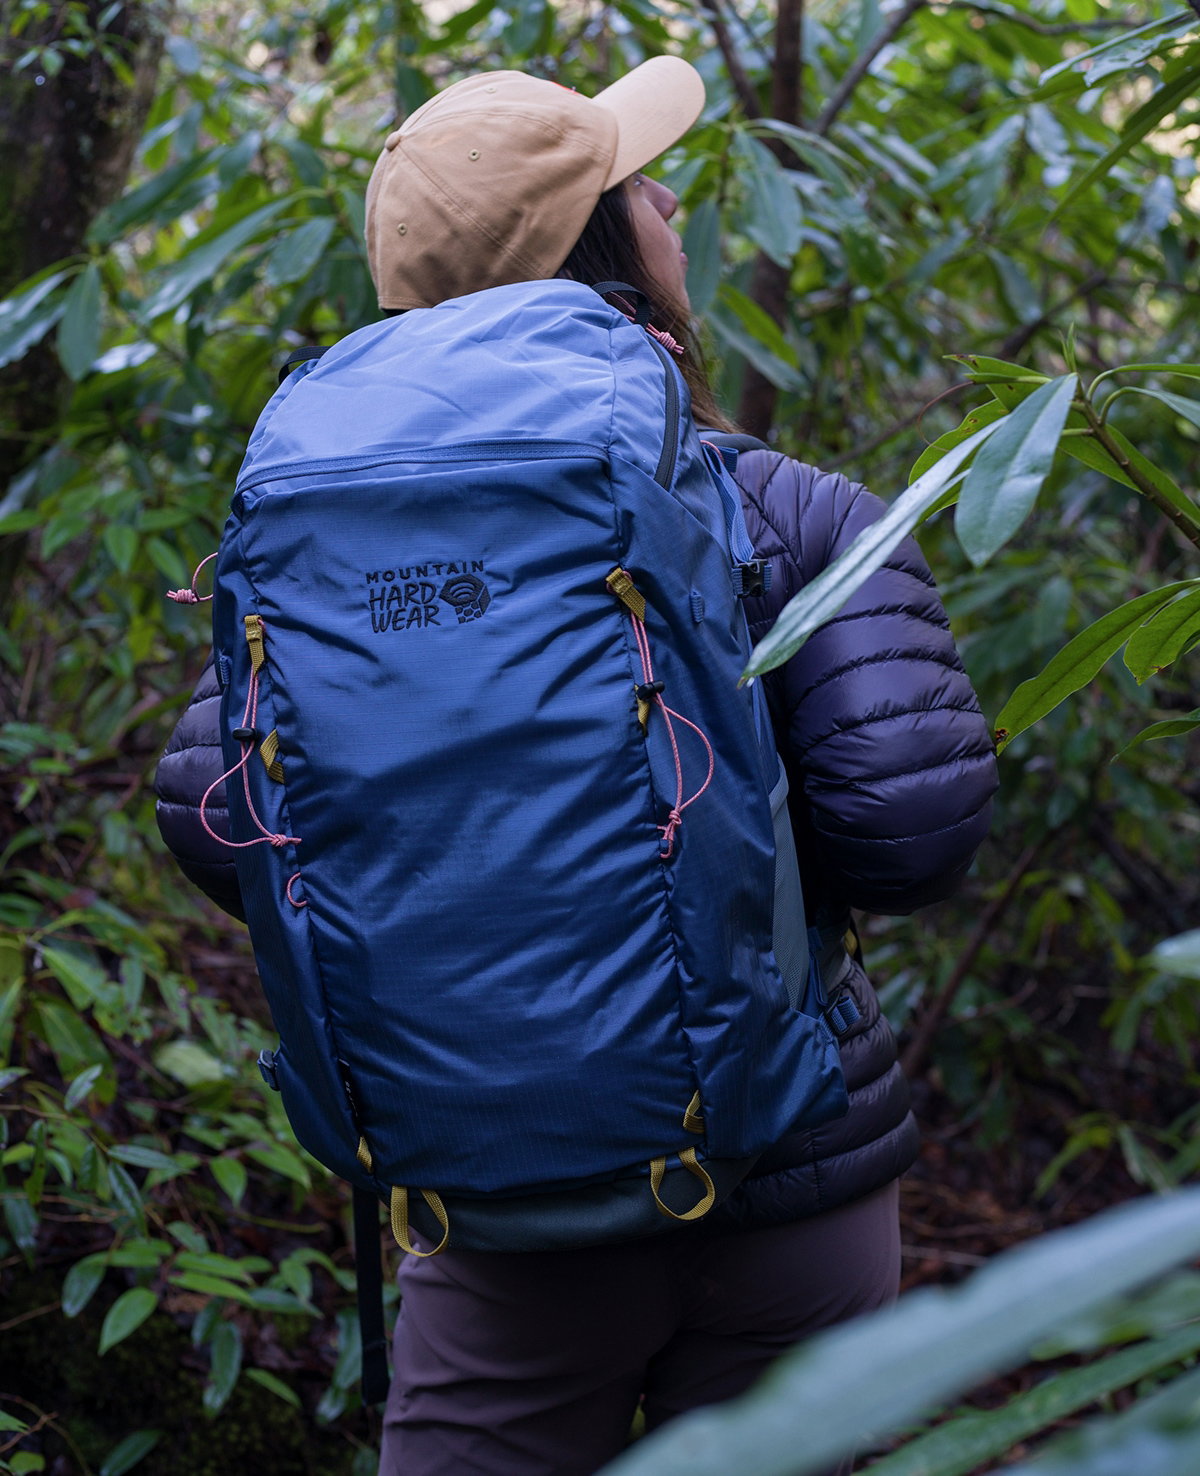 Mountain Hardwear: Debut of the durable, done-in-a-day backcountry pack ...